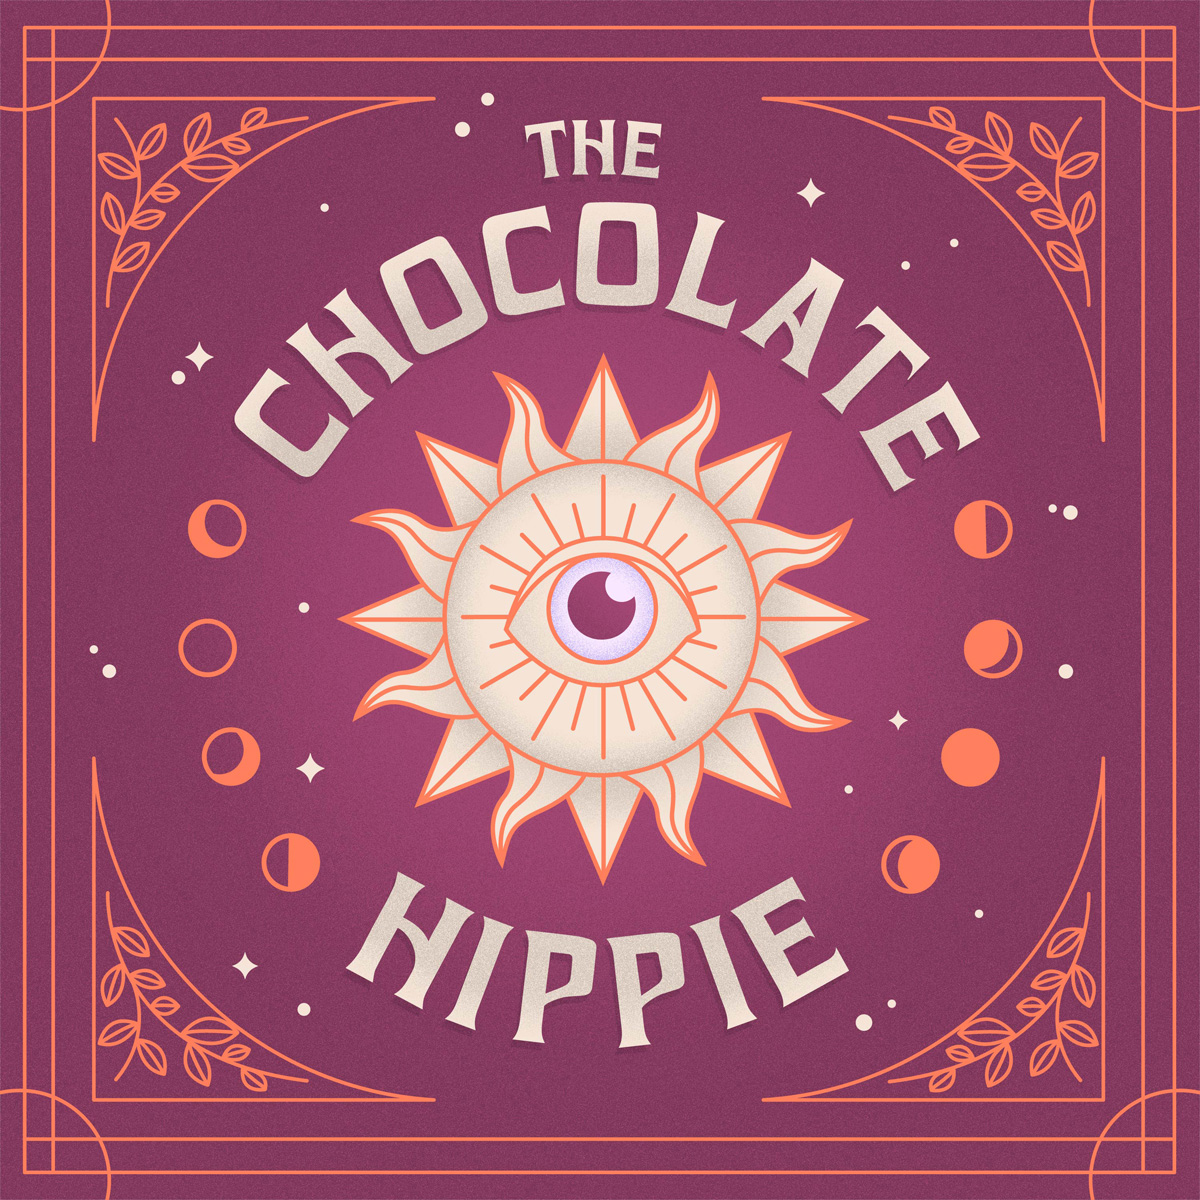 The Chocolate Hippie poster